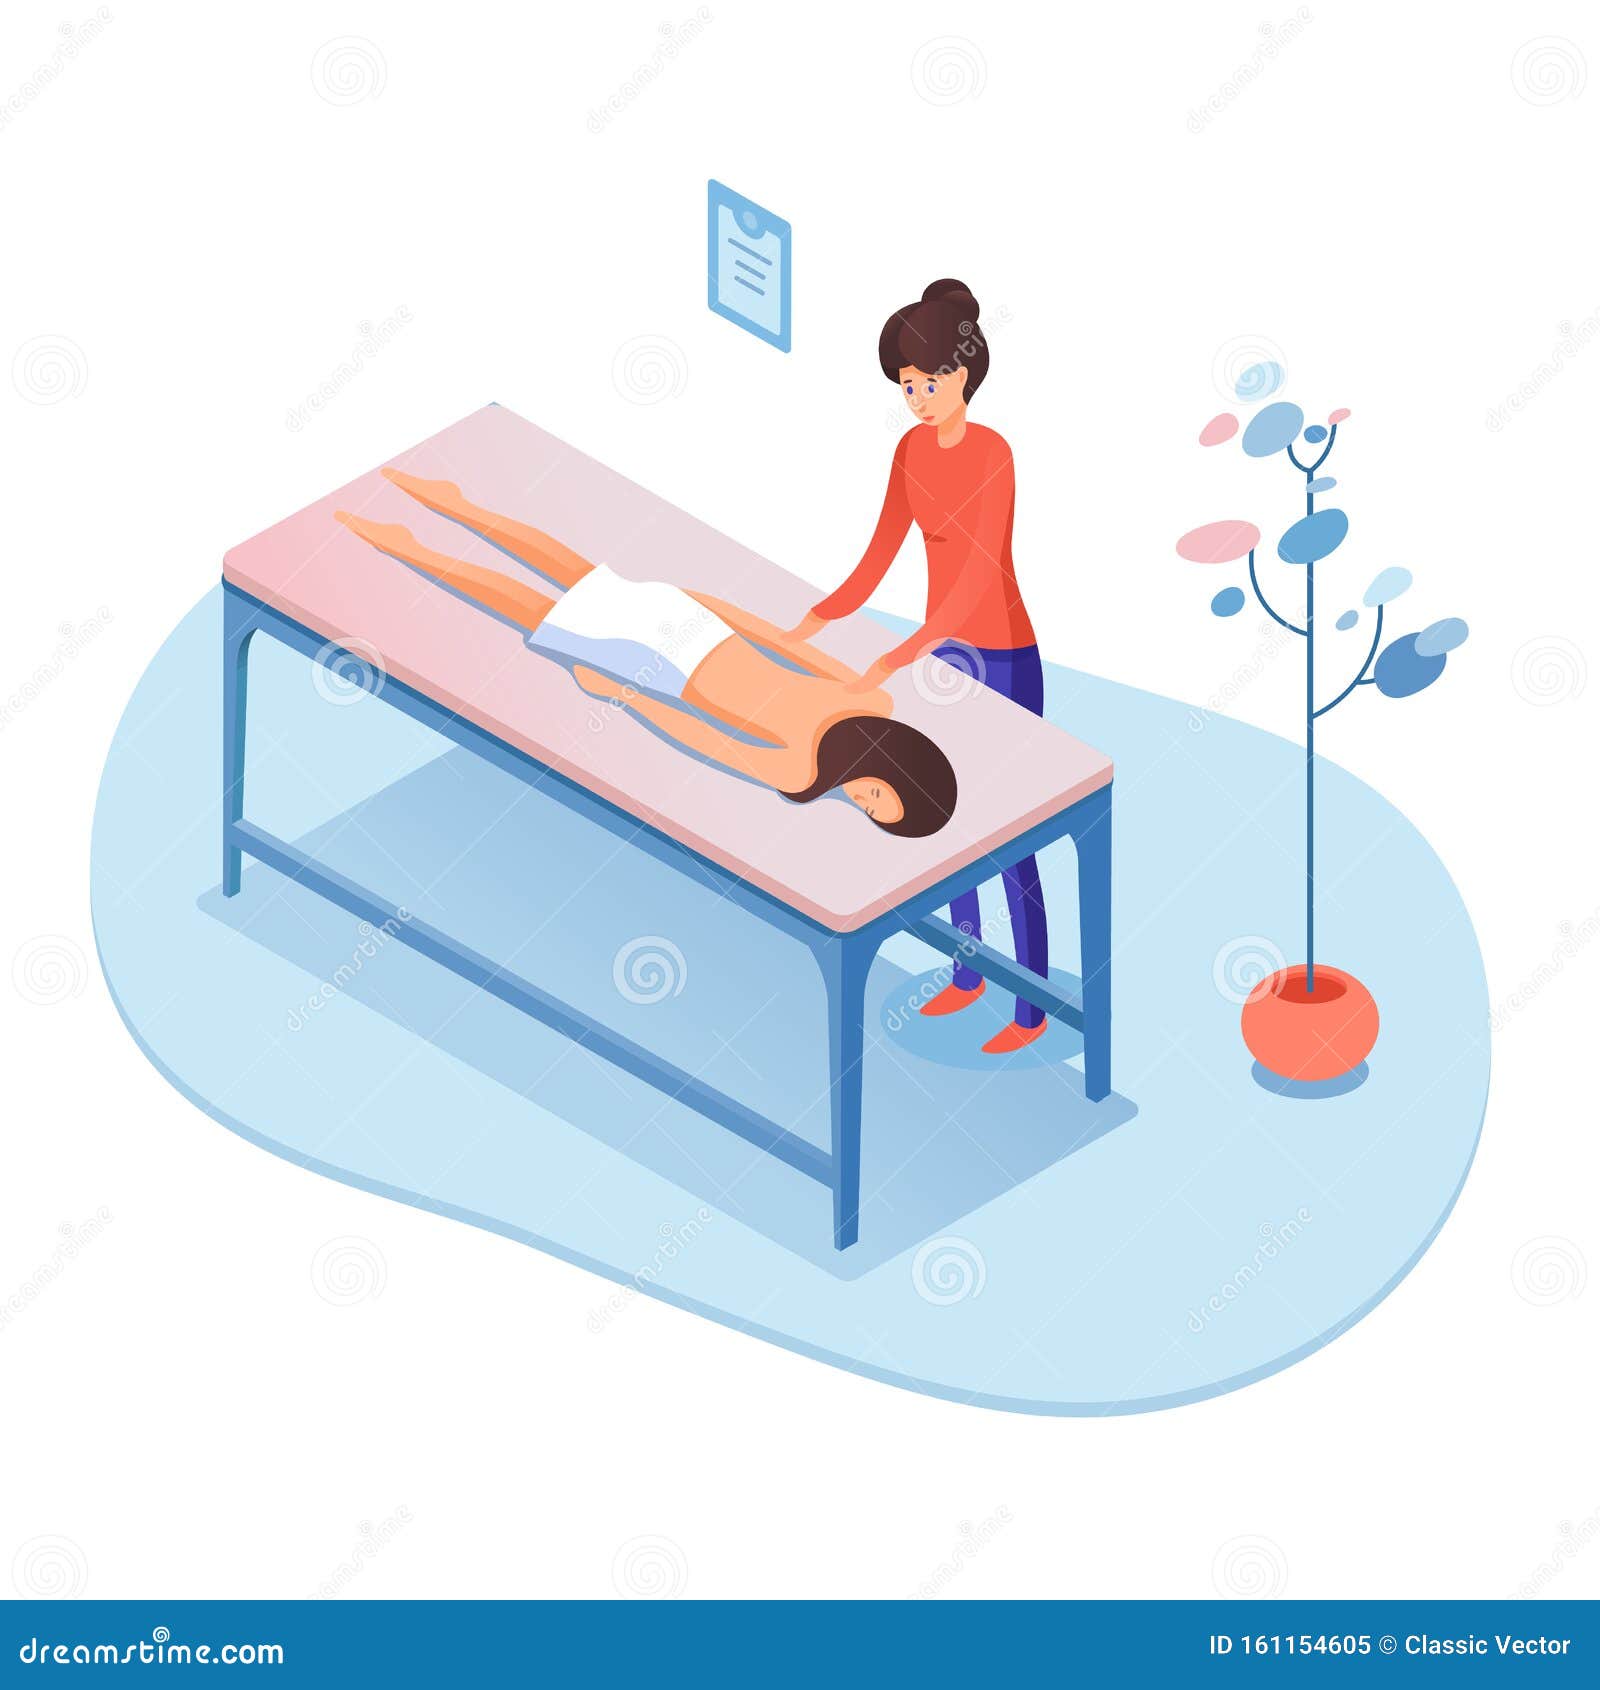 Massage Therapy Isometric Vector Illustration Isolated On White